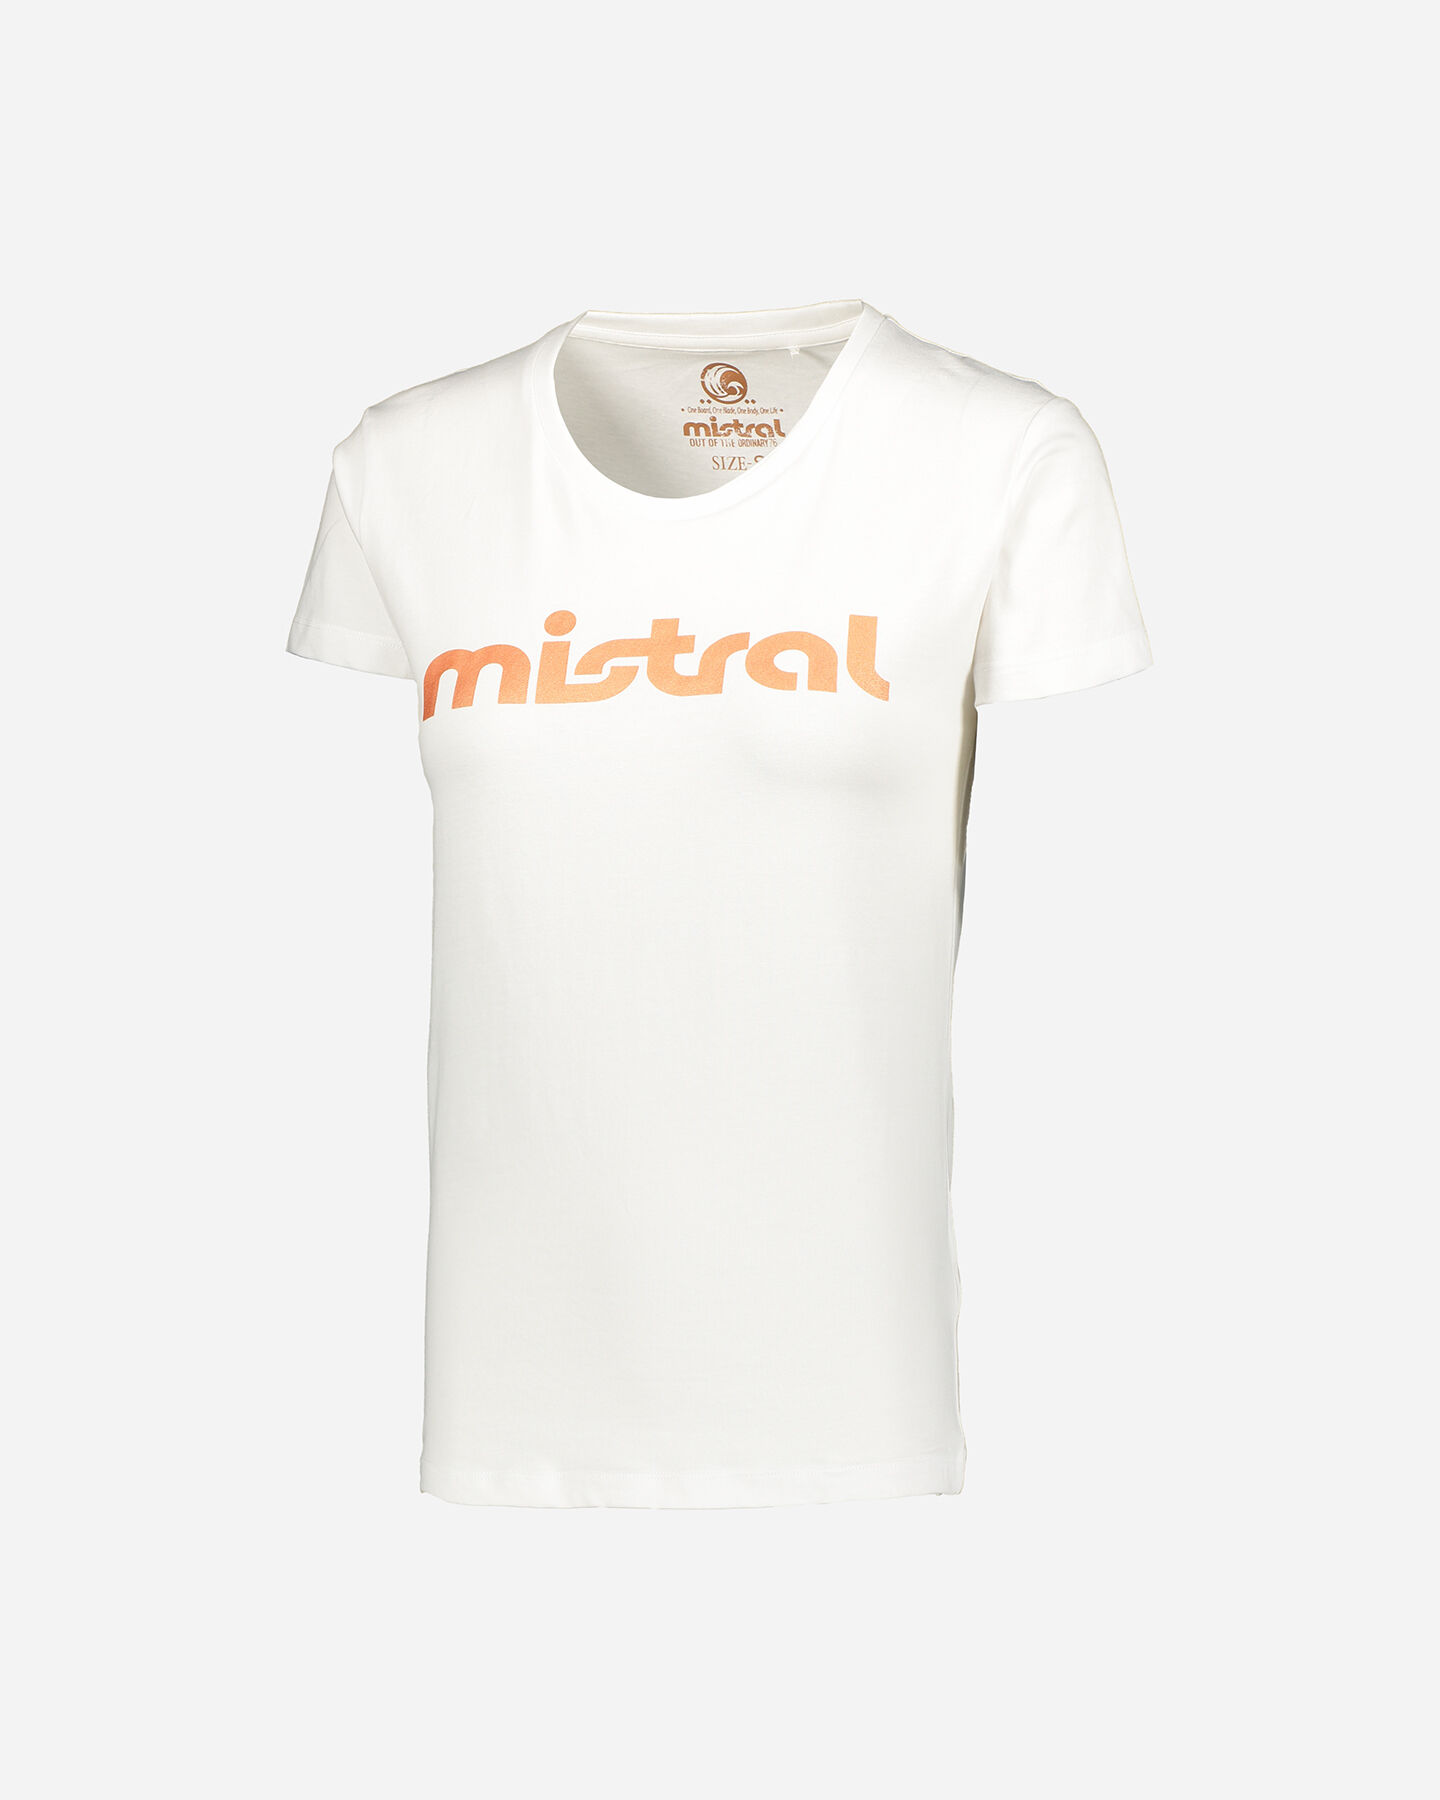  T-Shirt MISTRAL LOGO W S4087795|001|S scatto 0